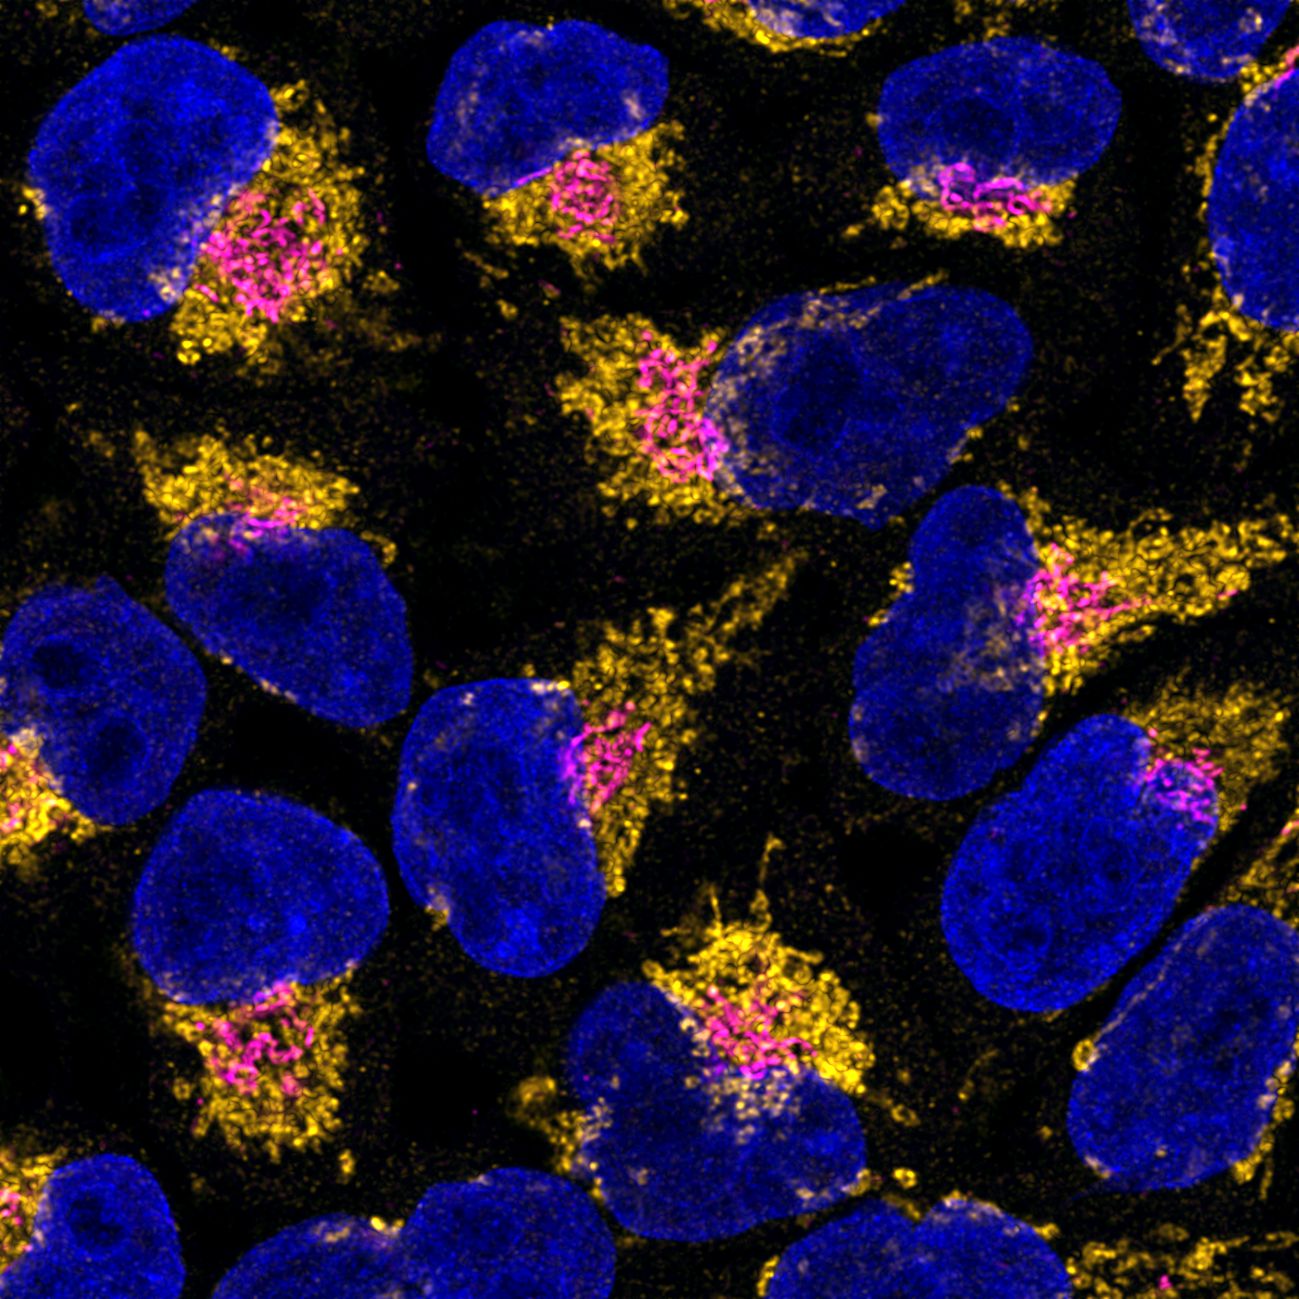 Immunofluorescence of HeLa: PFA-fixed HeLa cells were stained with anti-COXIV (11242-1-AP) labeled with FlexAble CoraLite® Plus 550 Kit (KFA002, yellow), anti-GM130 (11308-1-AP) labeled with FlexAble CoraLite® Plus 650 Kit (KFA003, magenta) and DAPI (blue).​ Confocal images were acquired with a 100x oil objective and post-processed. Images were recorded at the Core Facility Bioimaging at the Biomedical Center, LMU Munich.